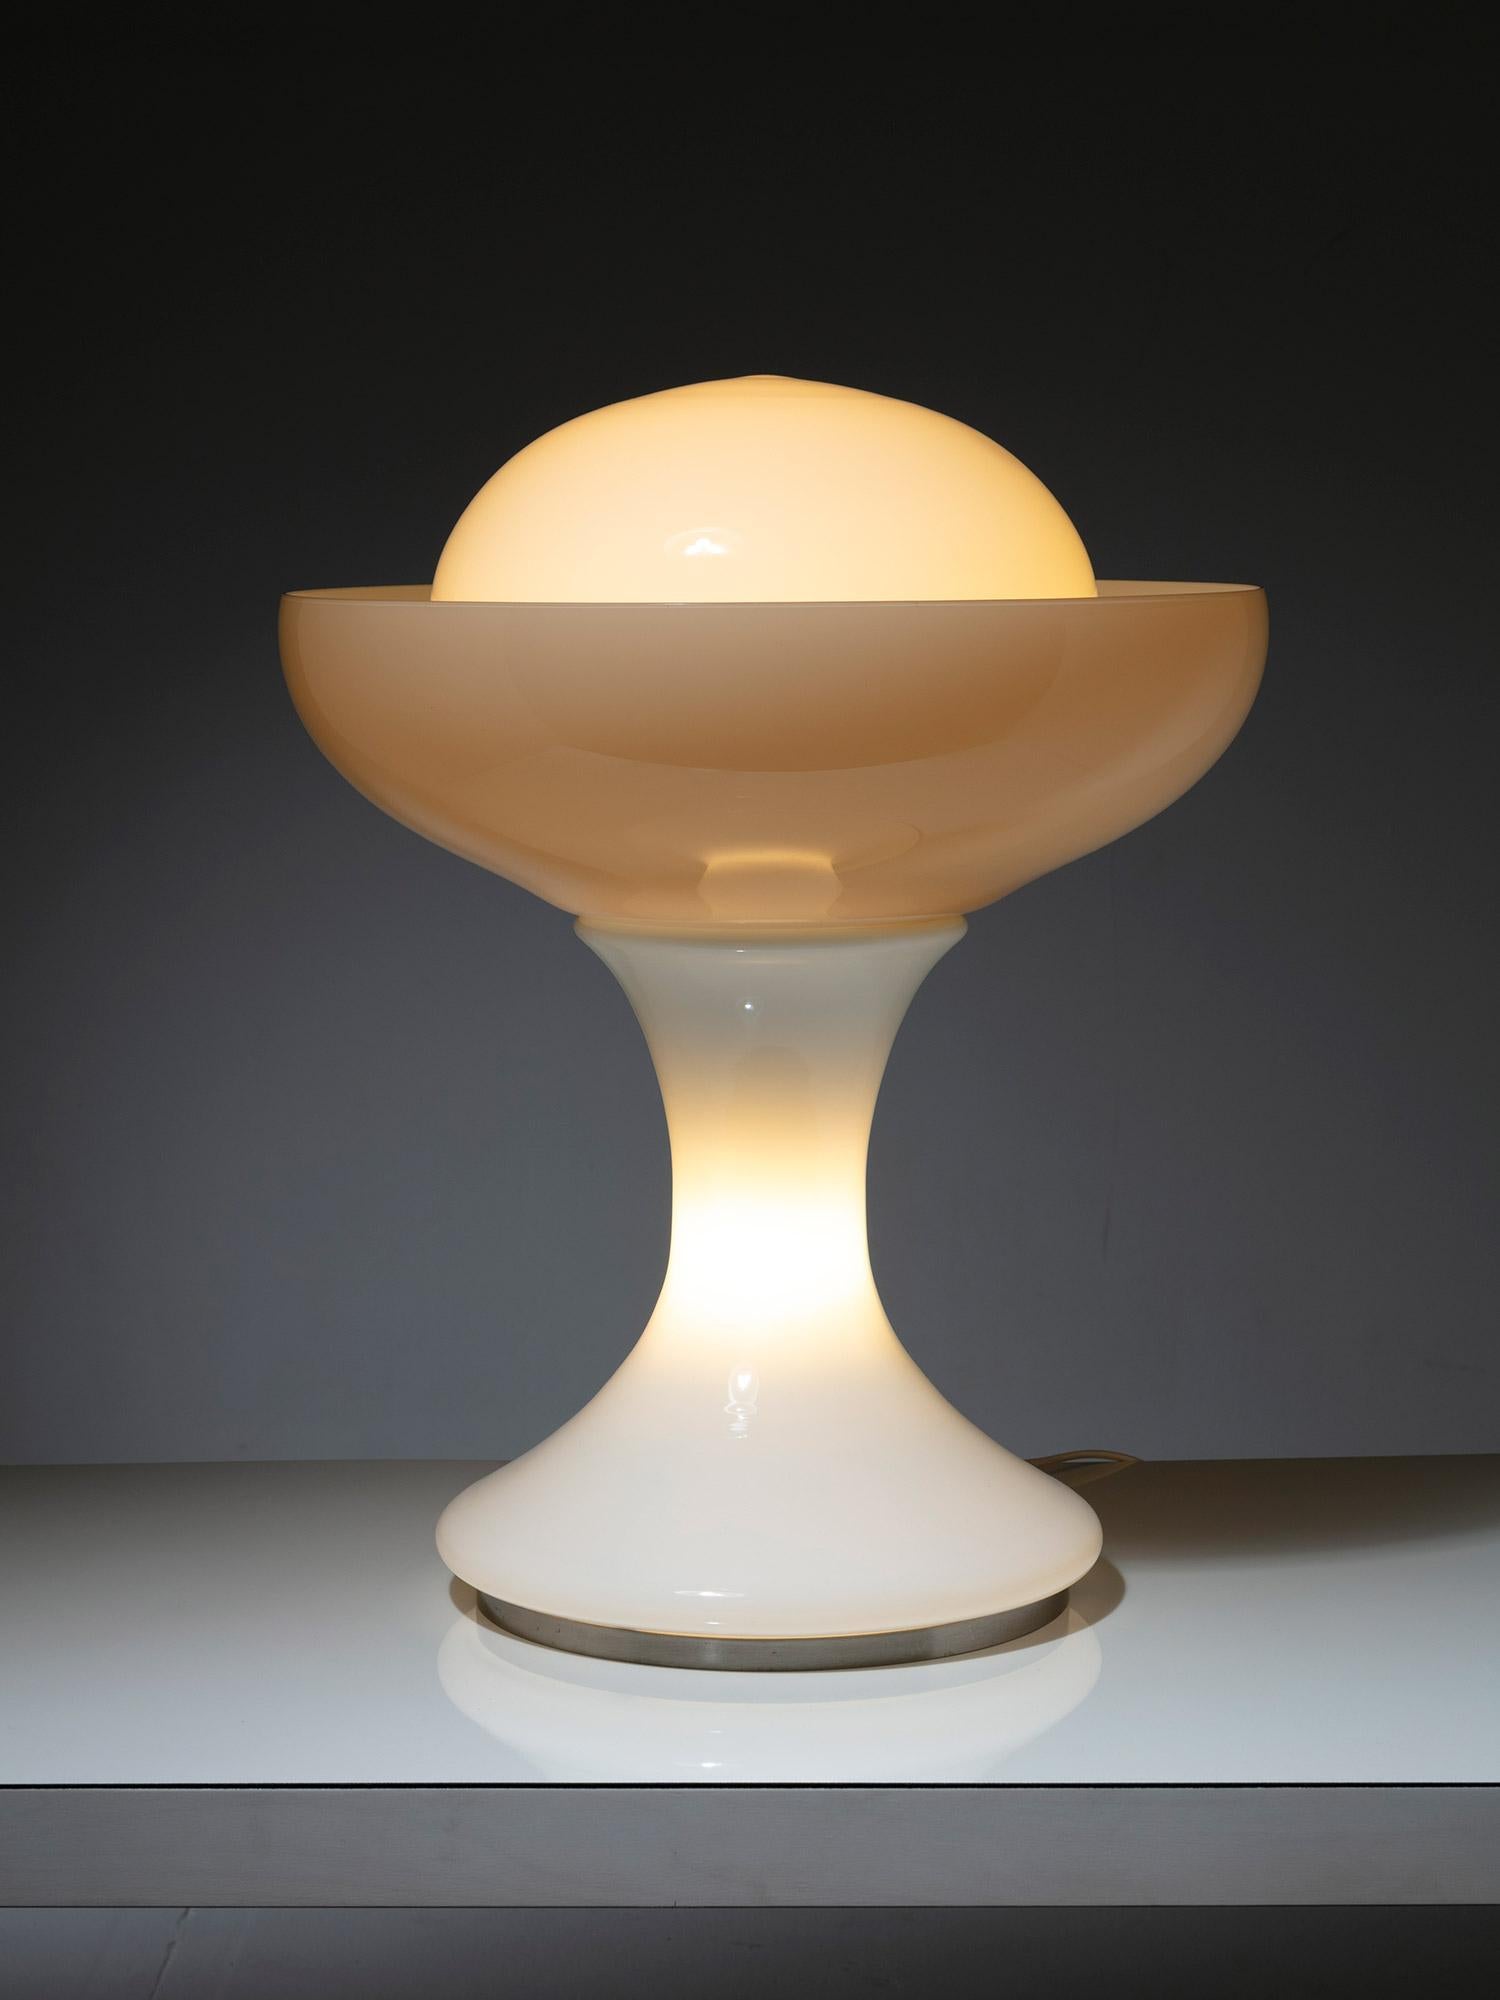 Rare table lamp model TA91 by Carlo Nason for Selenova.
Three Murano glass pieces connected together creating an biomorphic lighting sculpture.